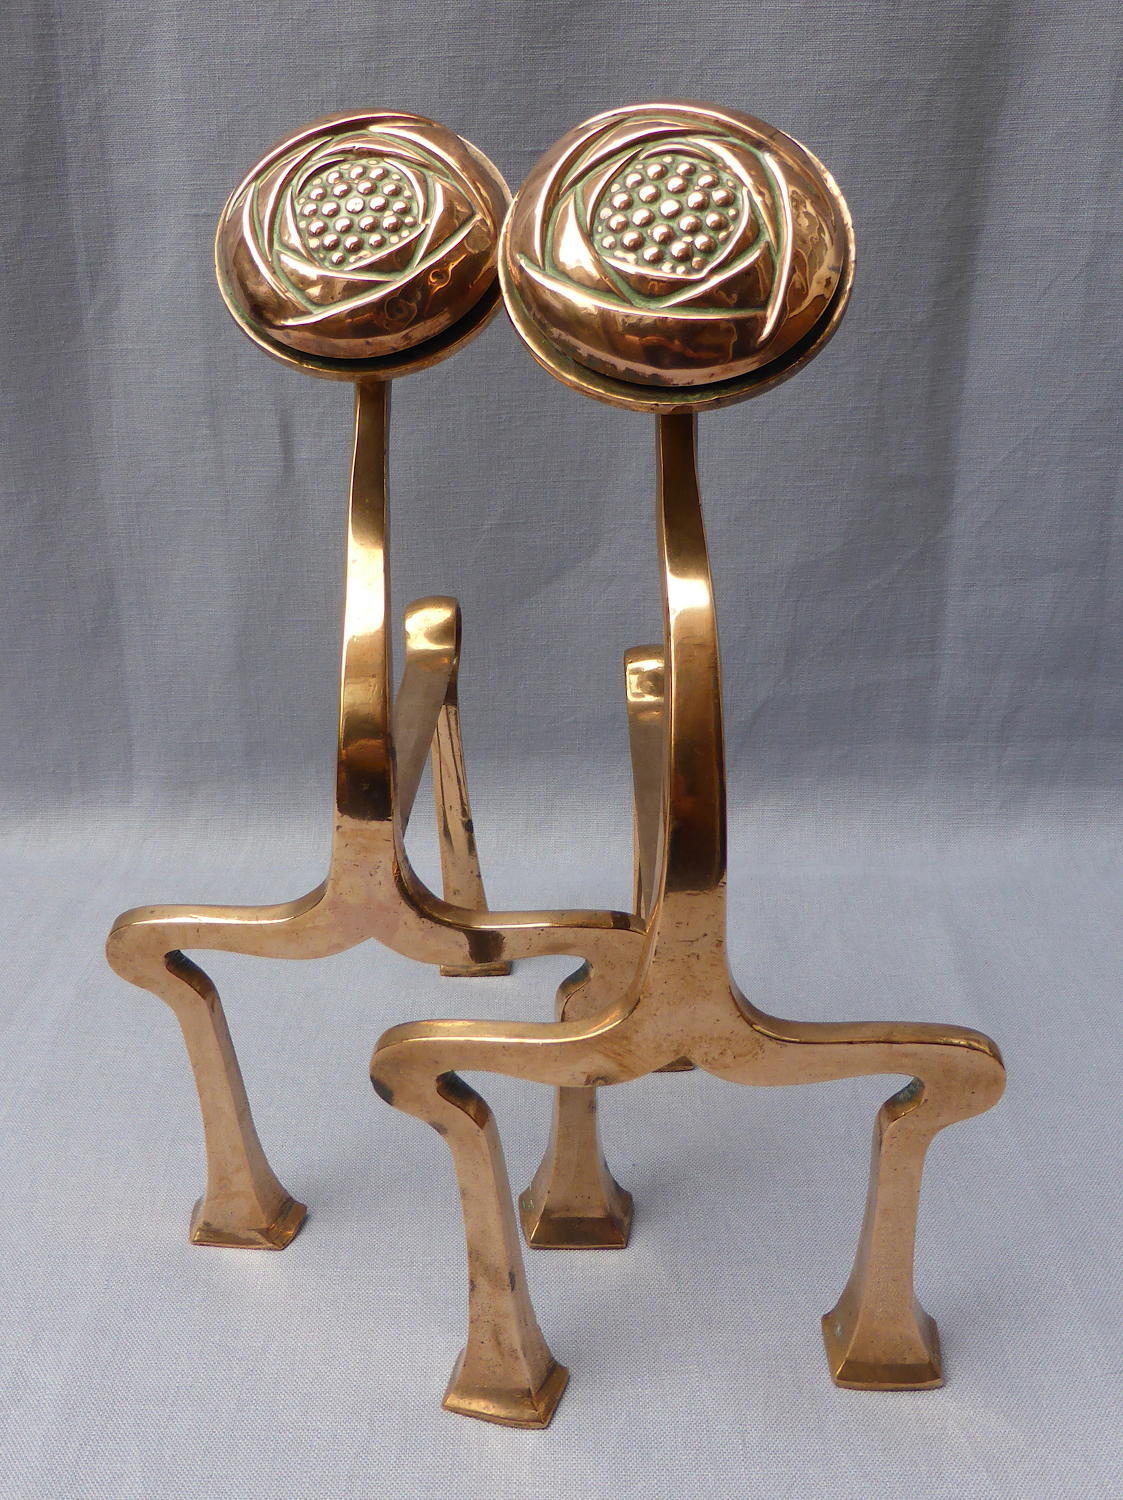 Fine pair of Arts & Crafts style copper fire dogs